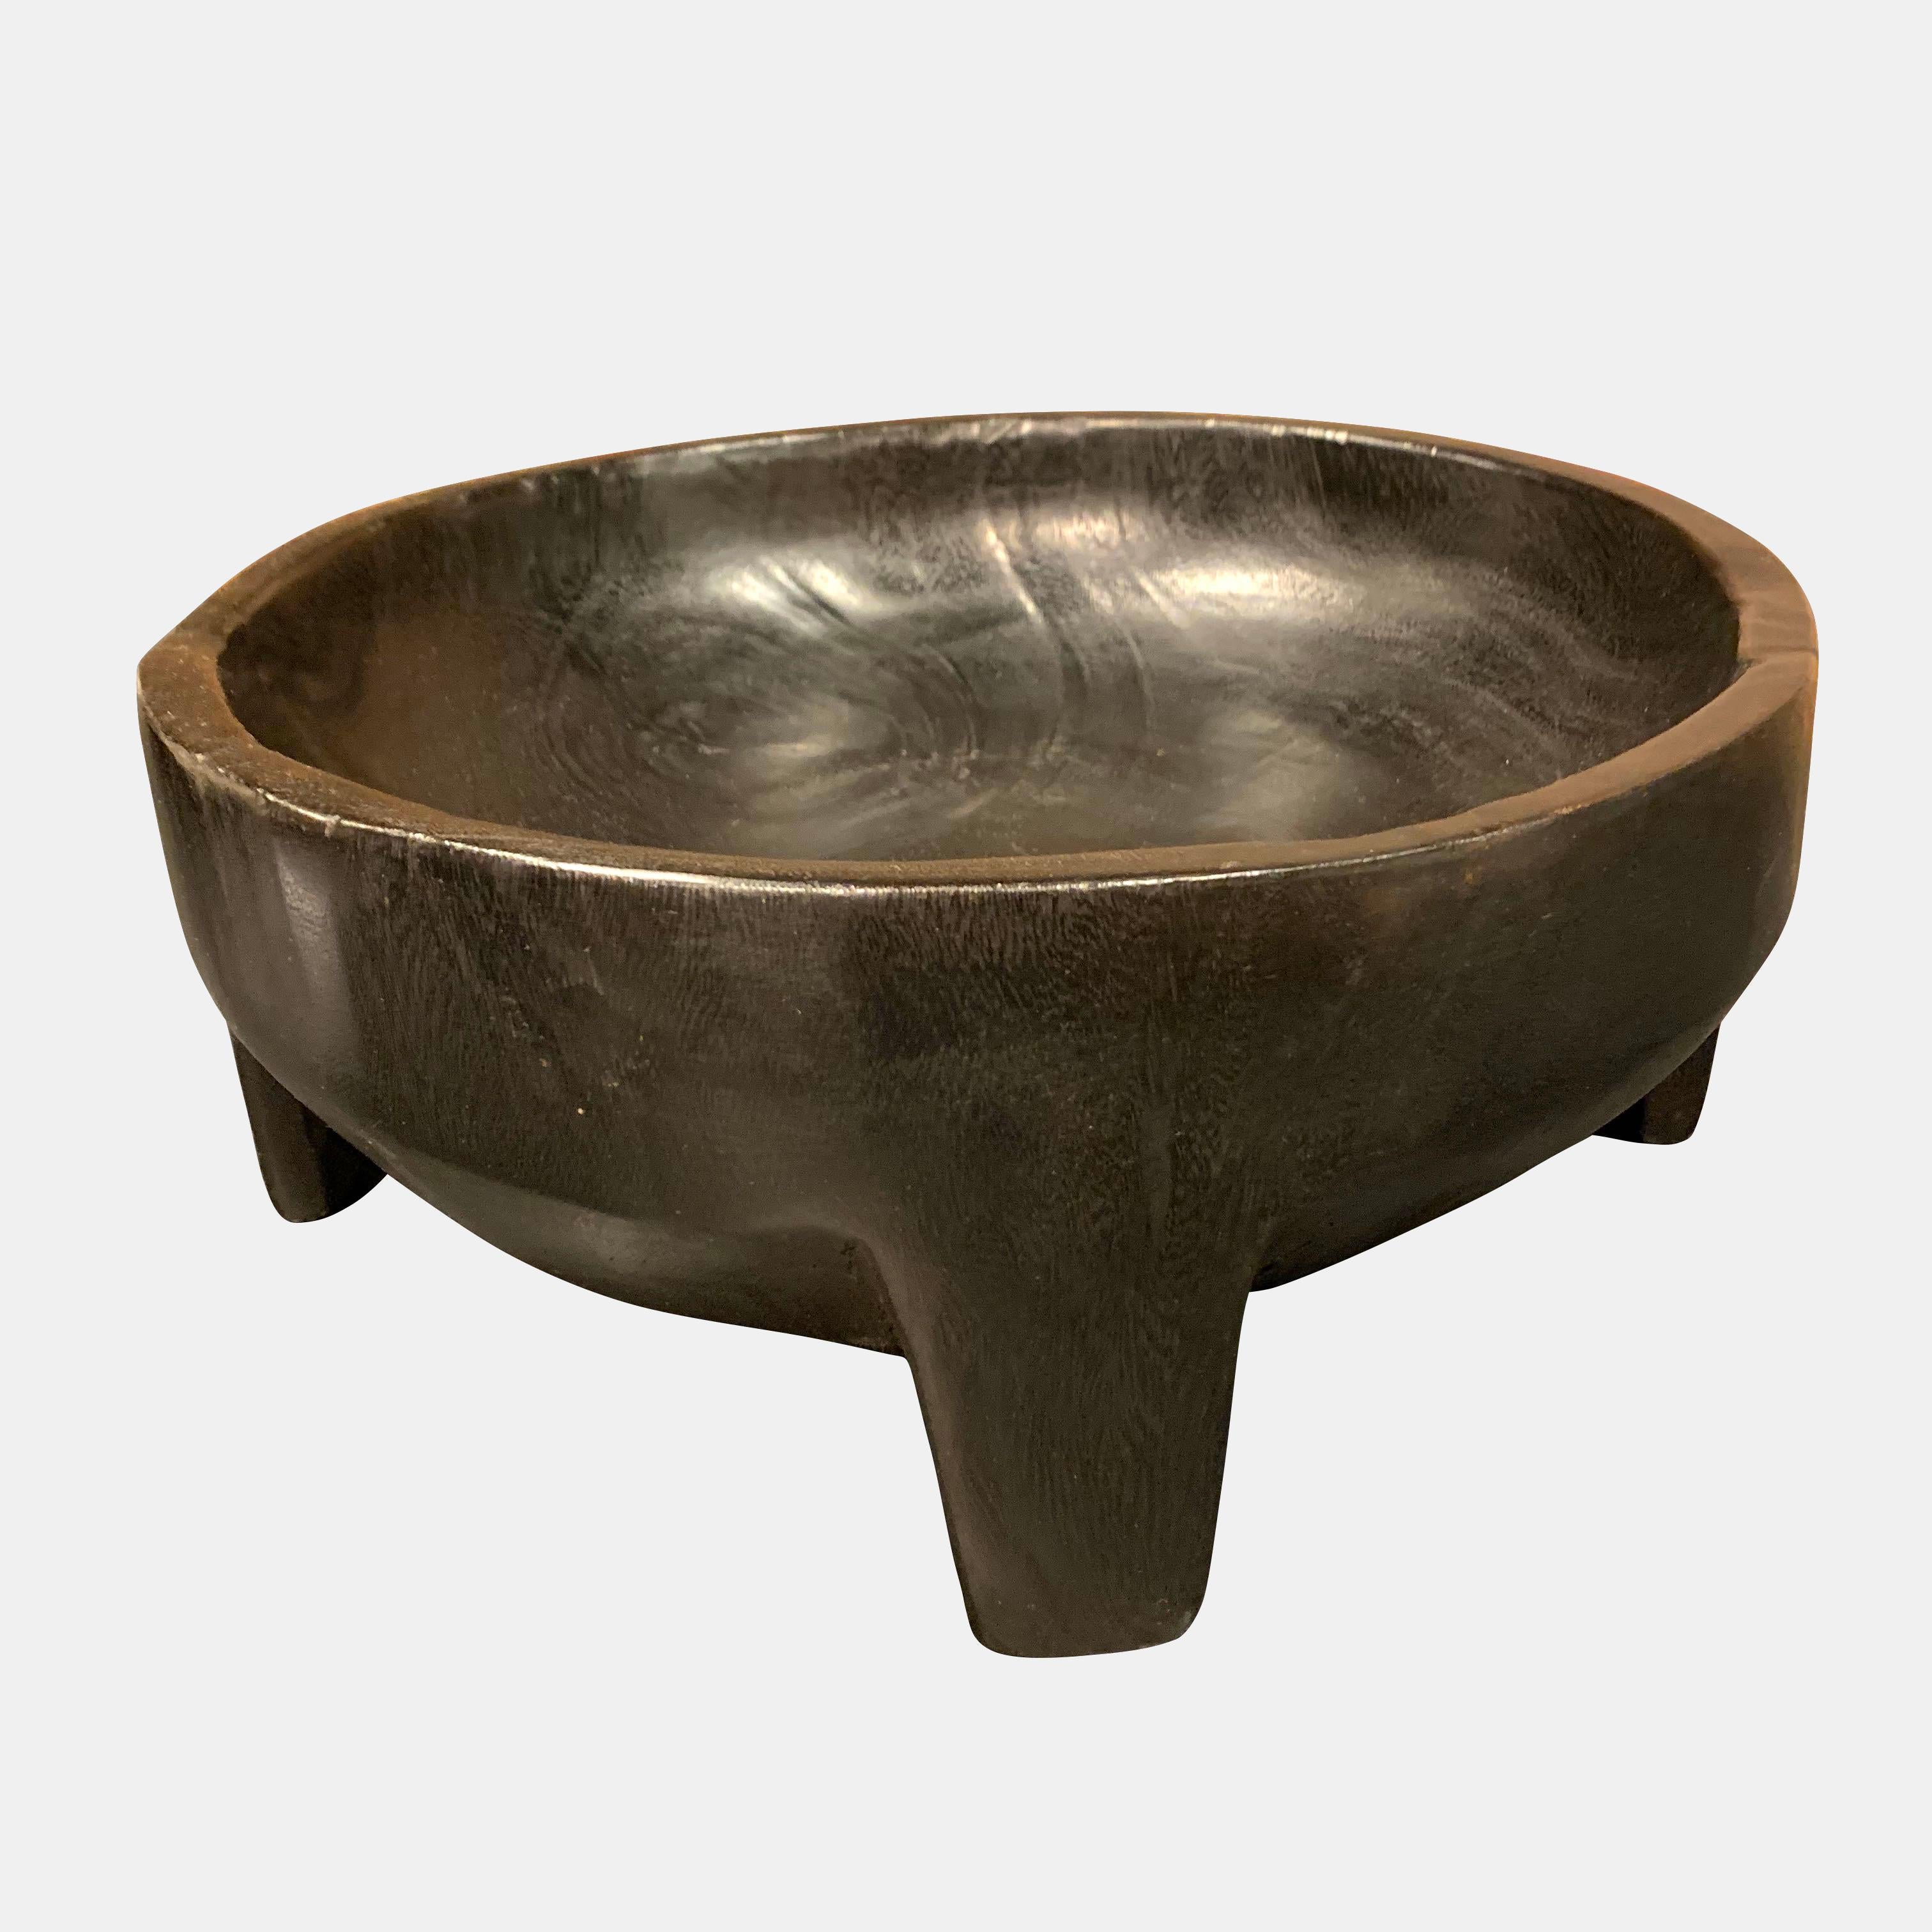 Contemporary Indonesian ebonized lychee wood footed bowl
Decorative and functional.
     